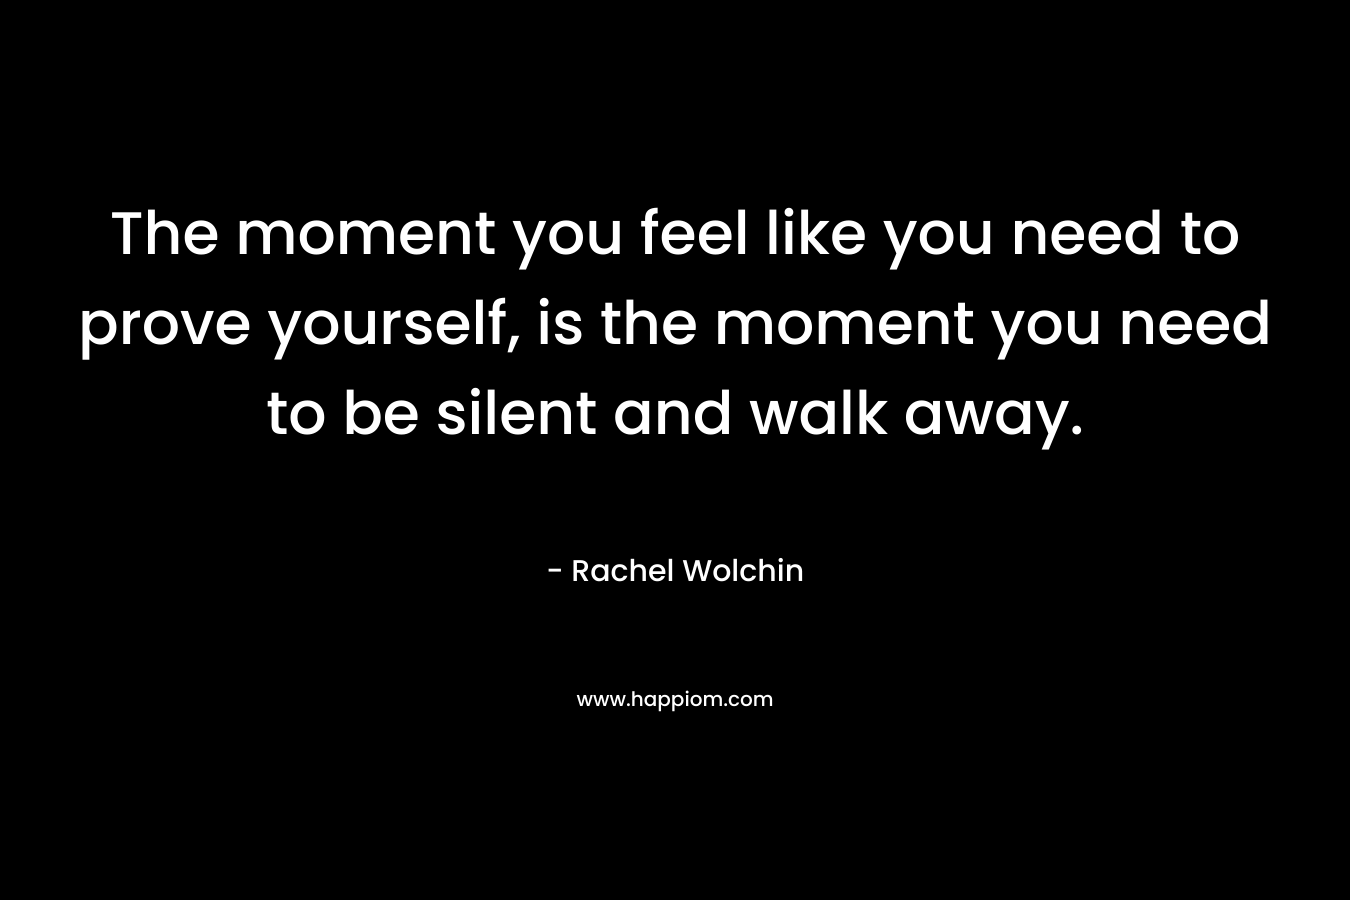 The moment you feel like you need to prove yourself, is the moment you need to be silent and walk away.